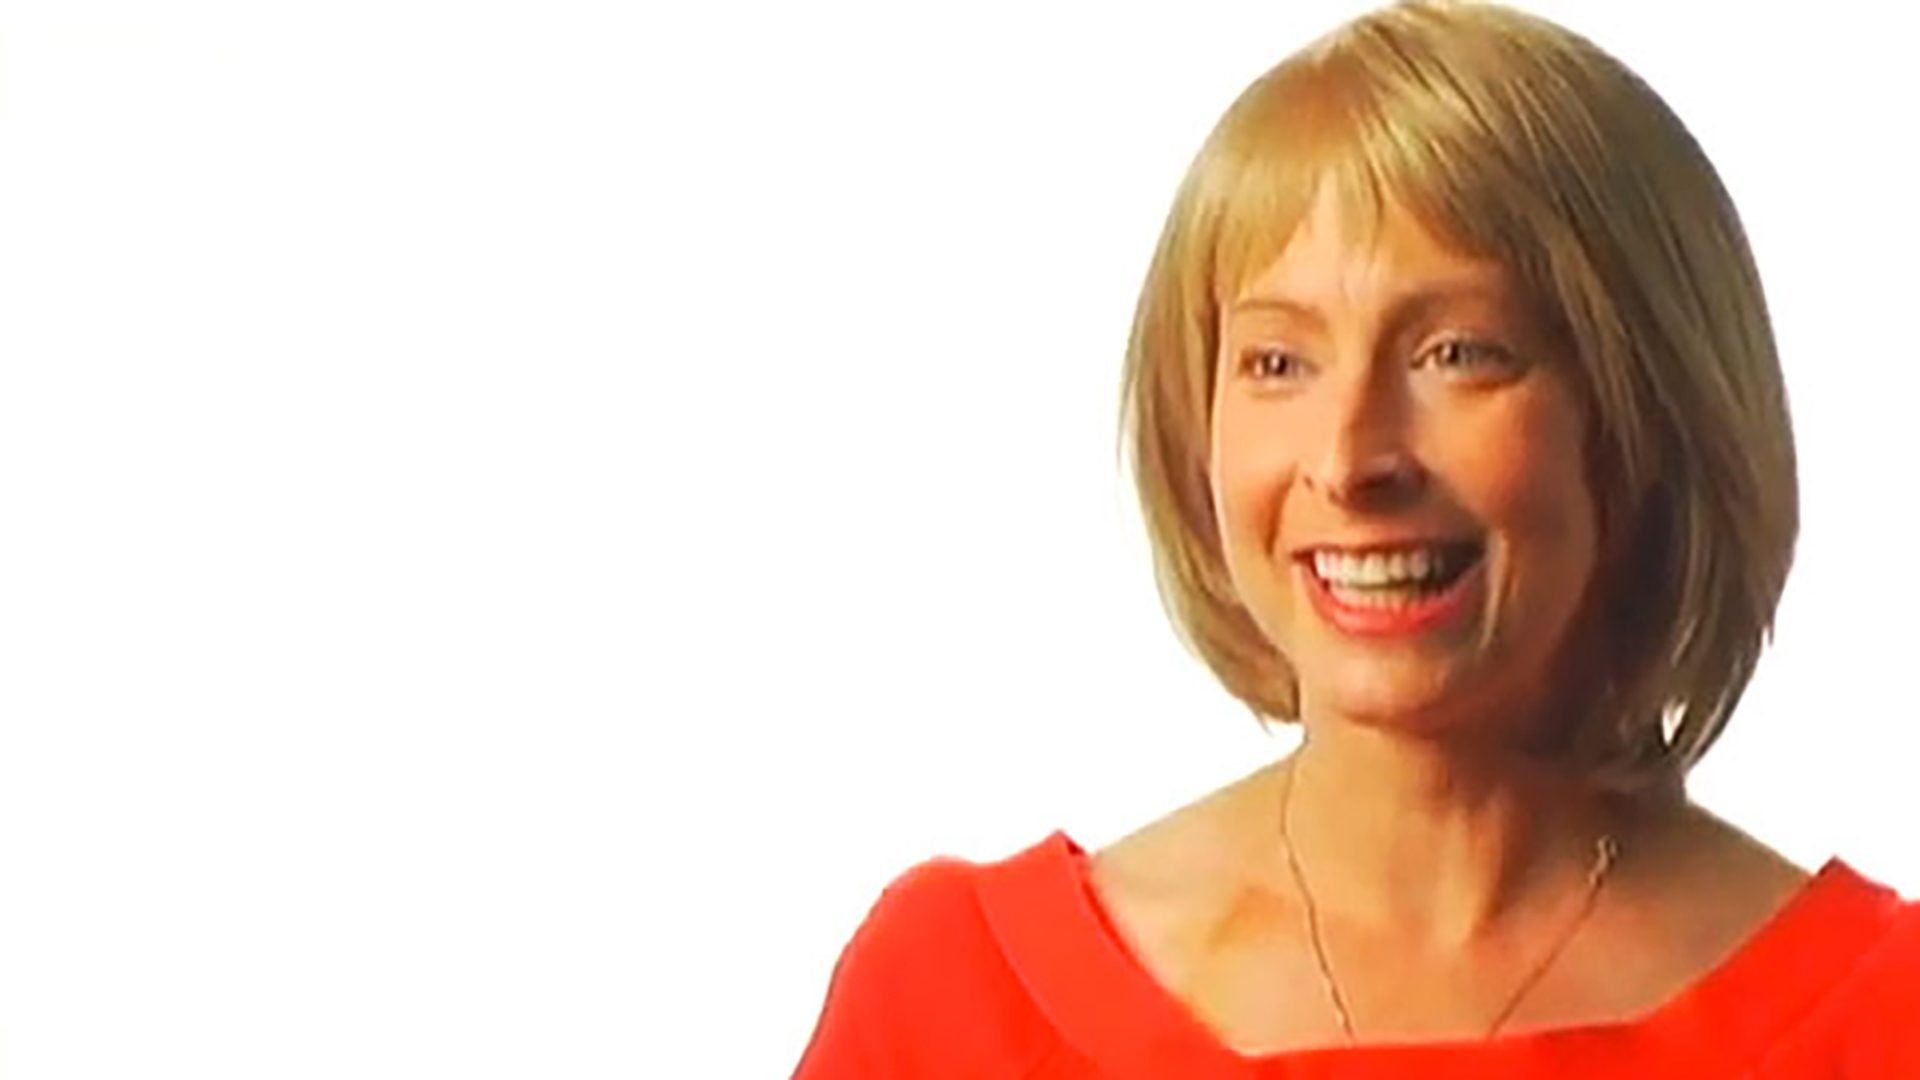 A smiling blonde woman wearing a red shirt is interviewed against a white background